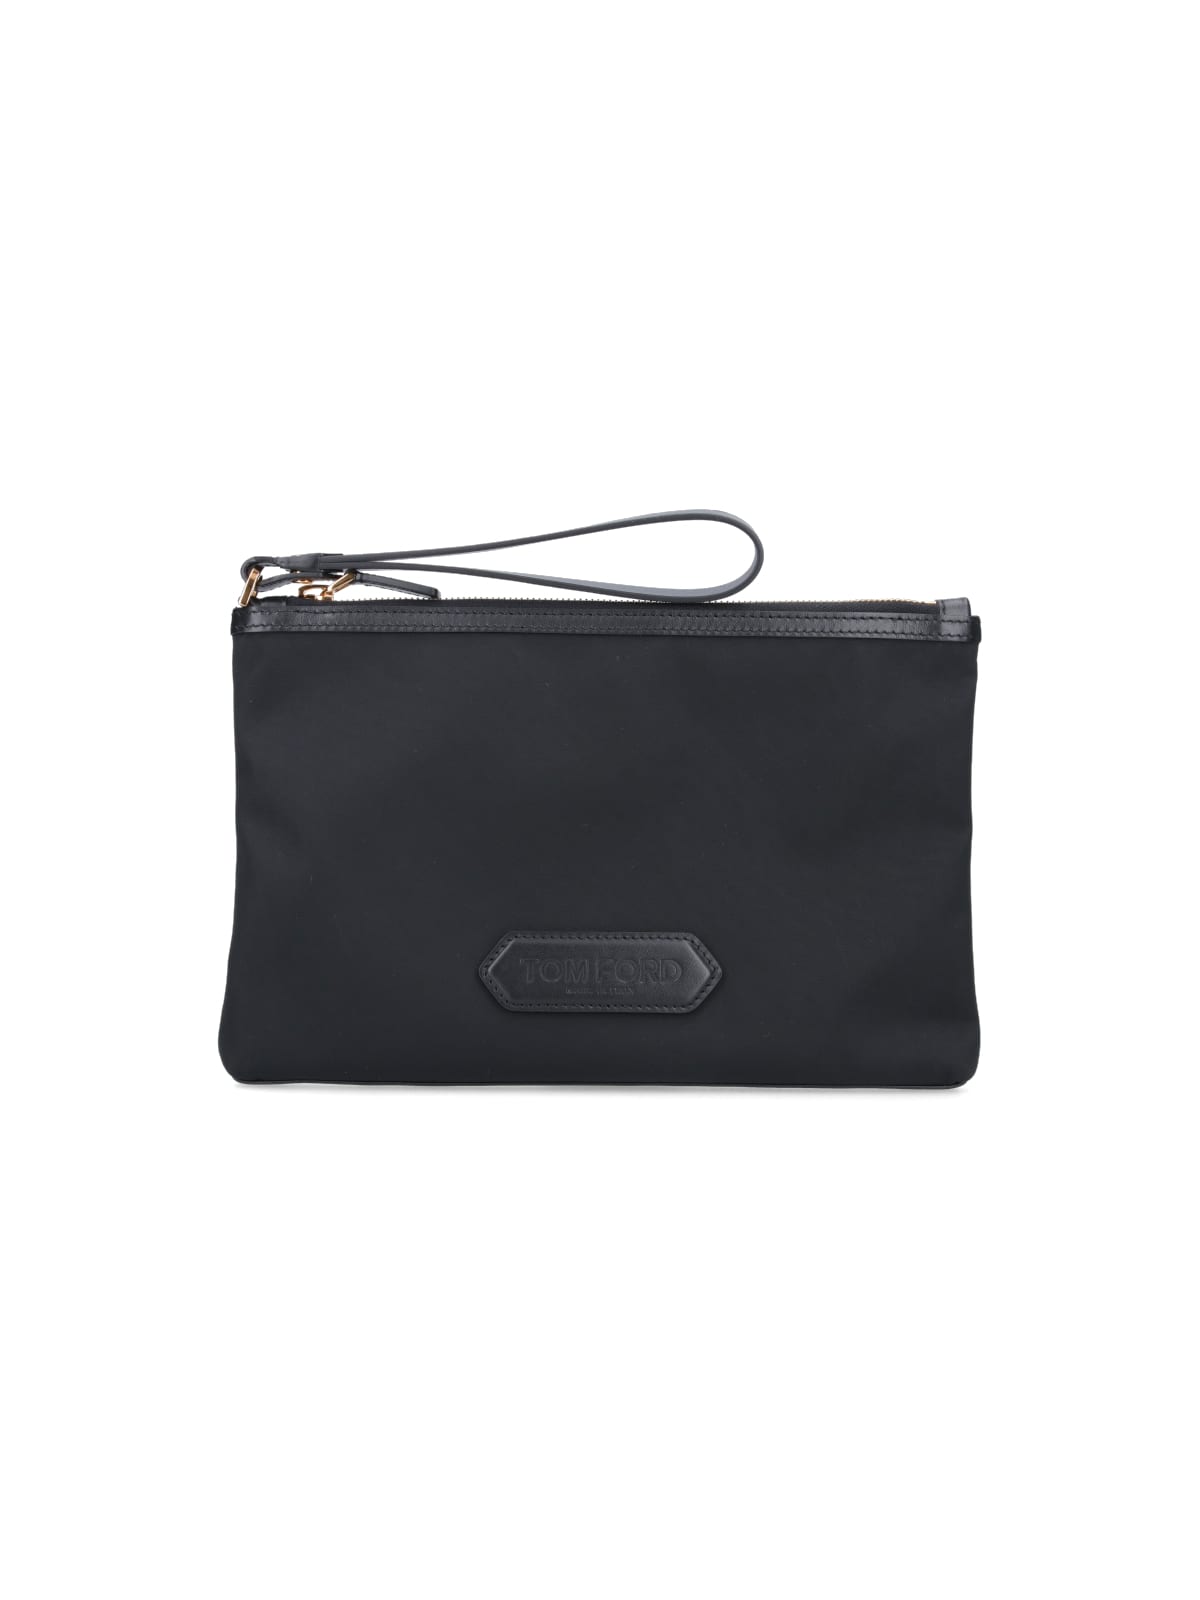 Tom Ford Logo Pouch In Black